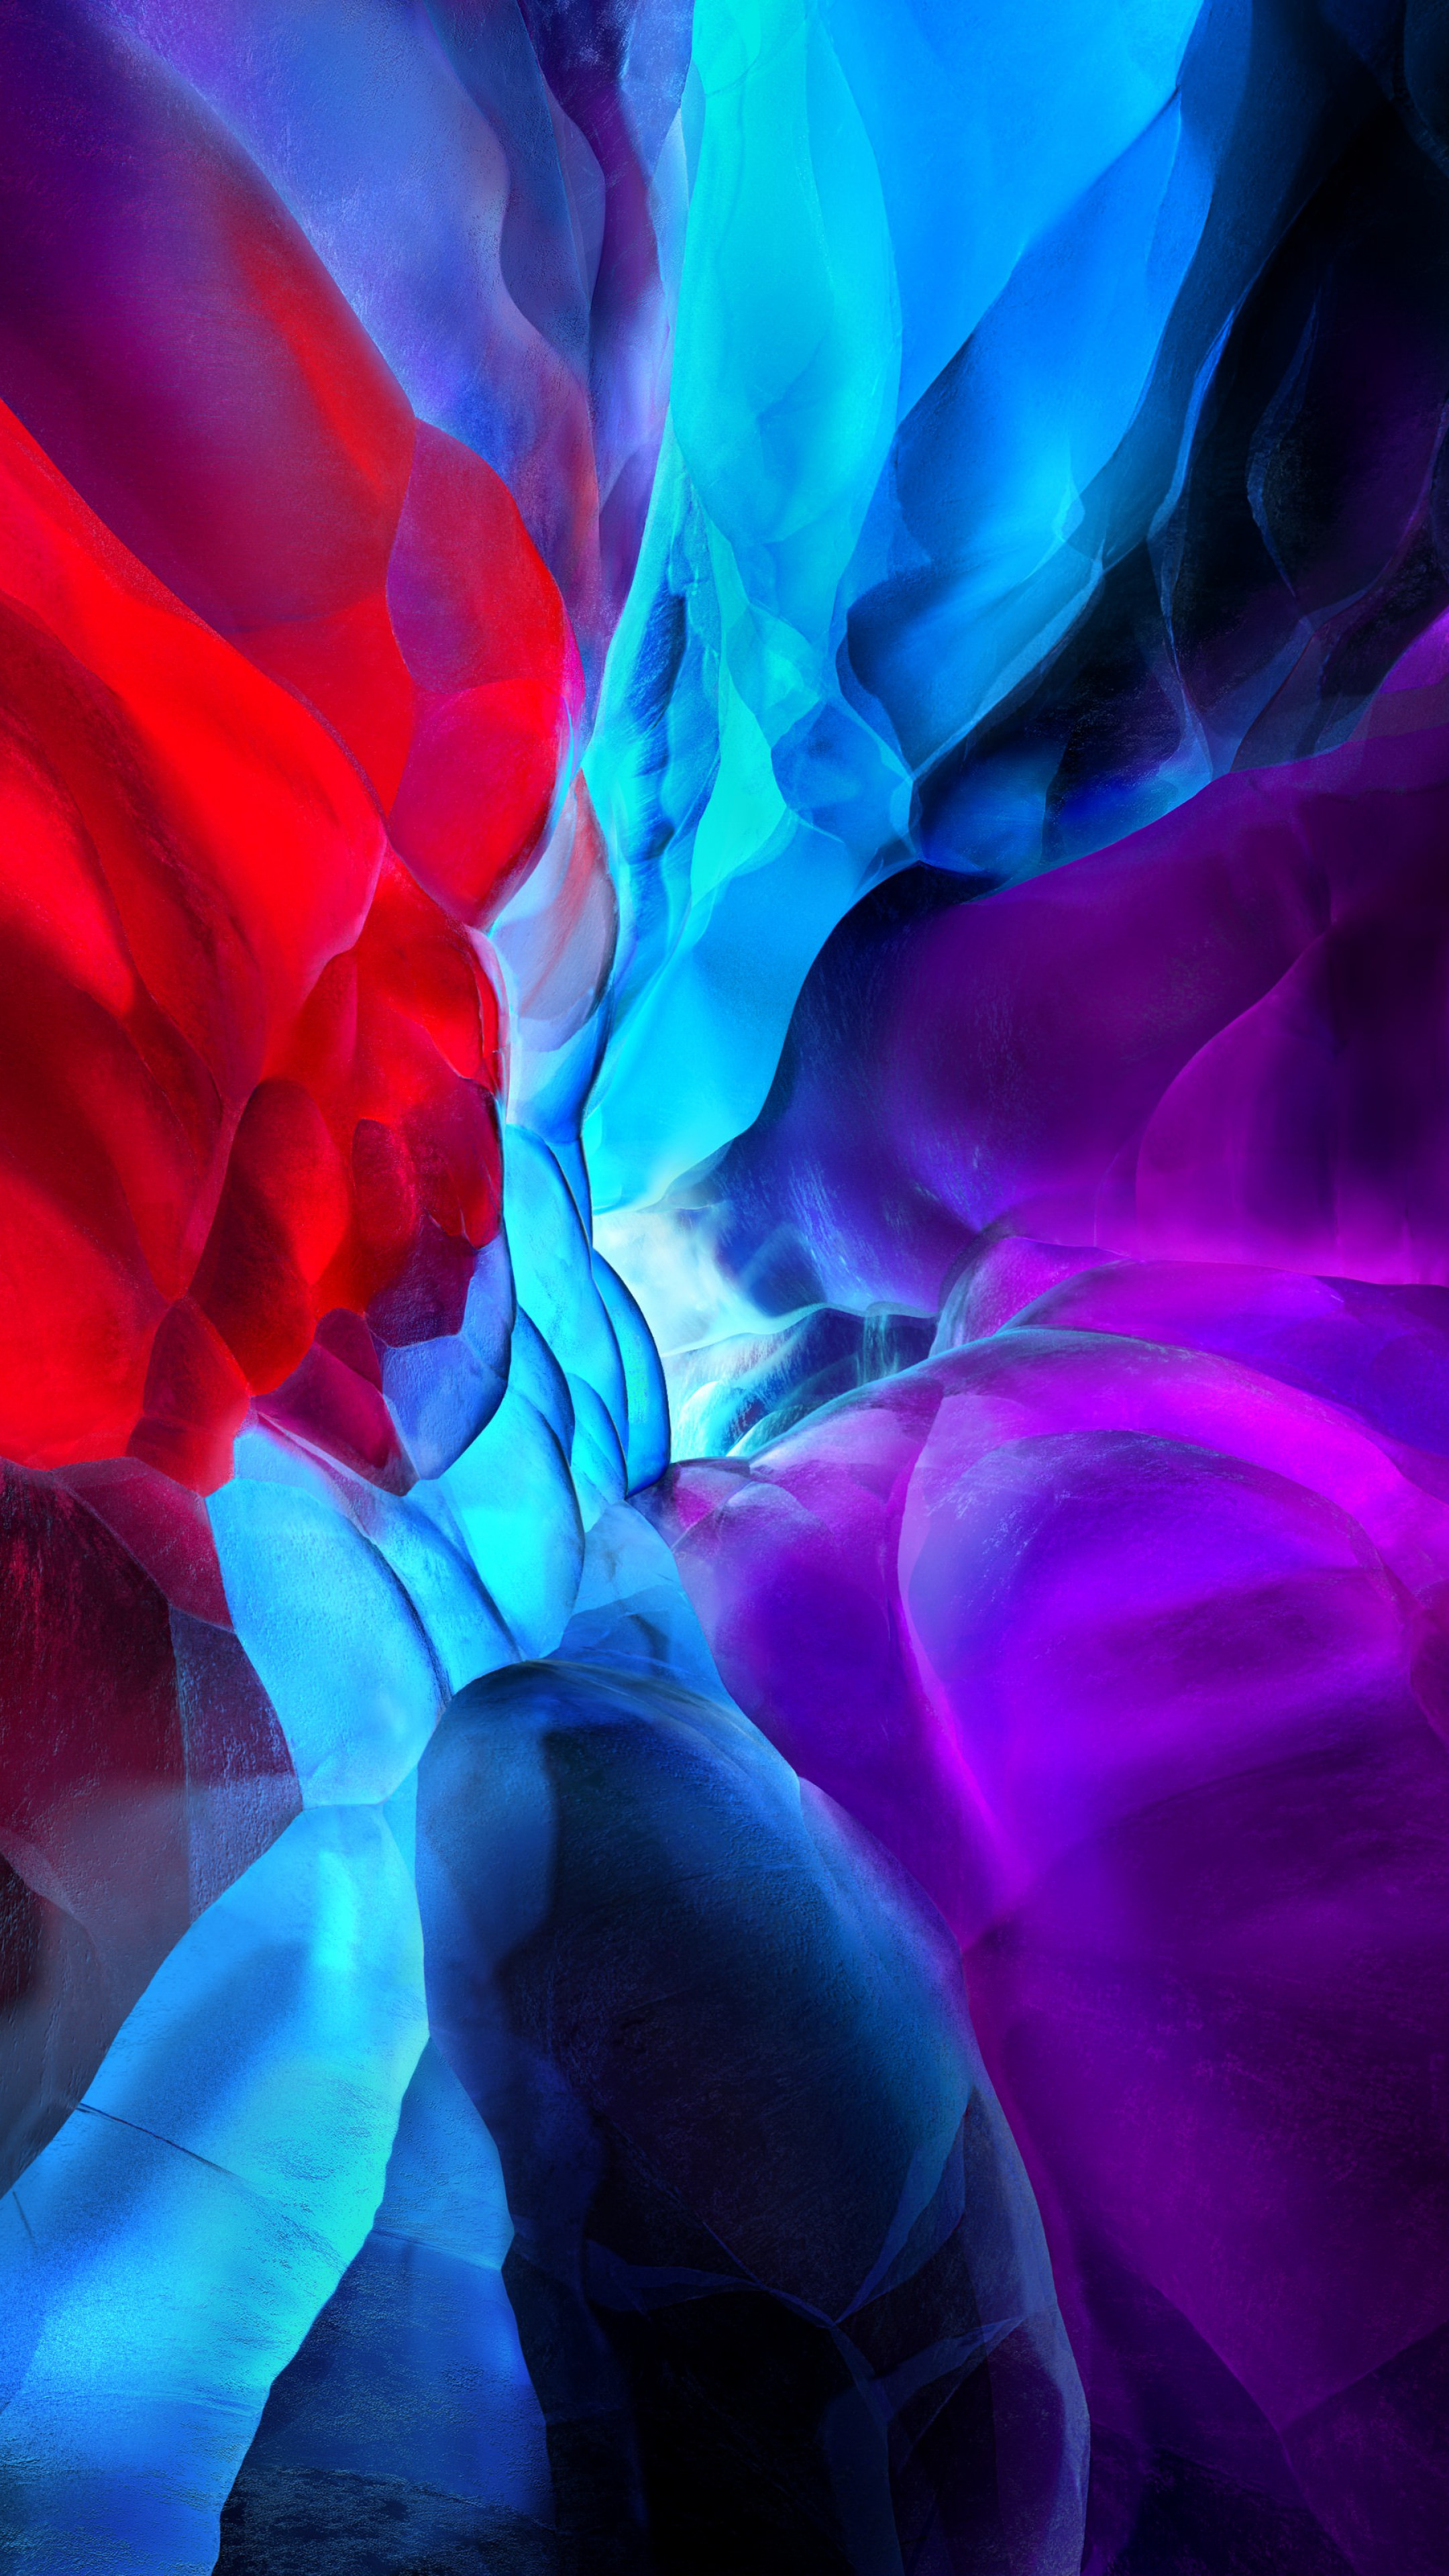 Digital paint Wallpaper 4K, Abstract background, #12601